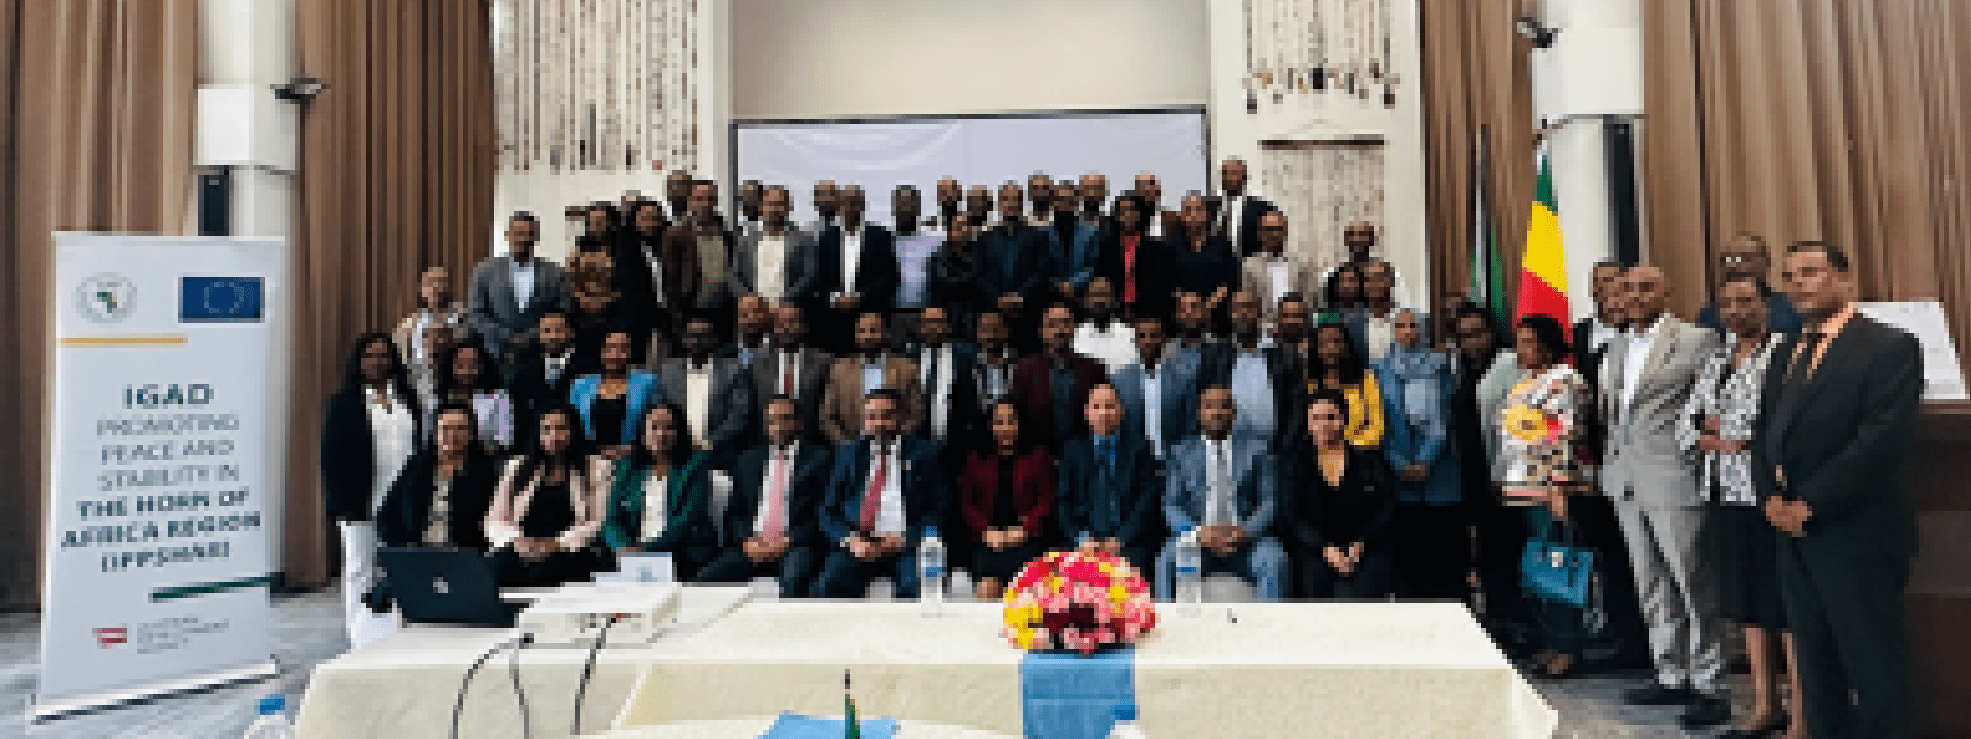 IGAD SSP Holds A National Workshop for Ethiopia’s Judiciary on Transitional Justice